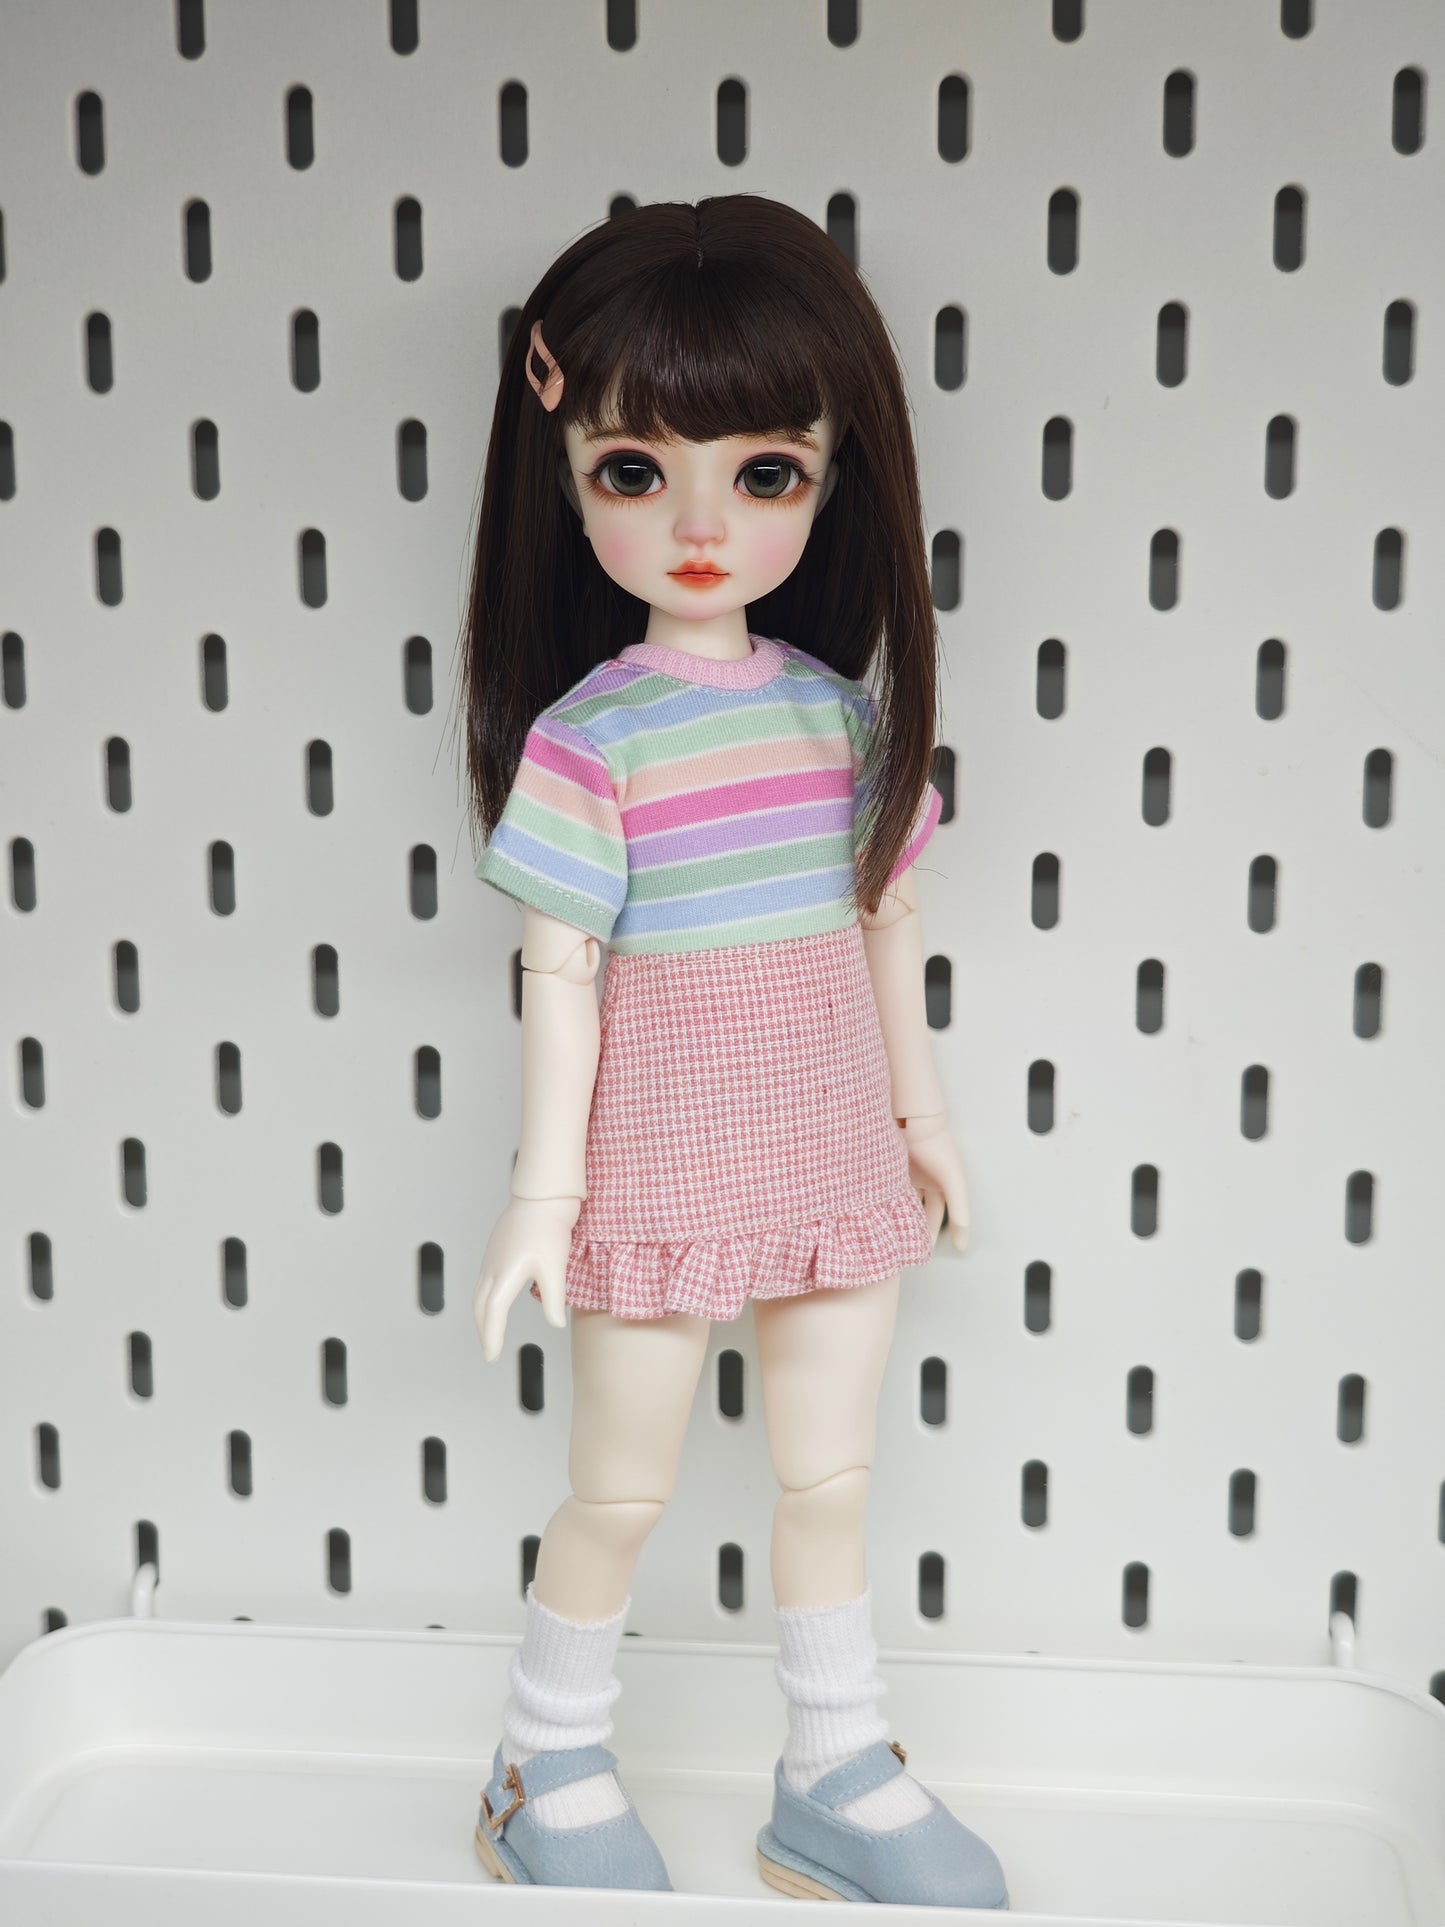 1/6 28cm girl doll Gloria in normal skin with makeup and fullset